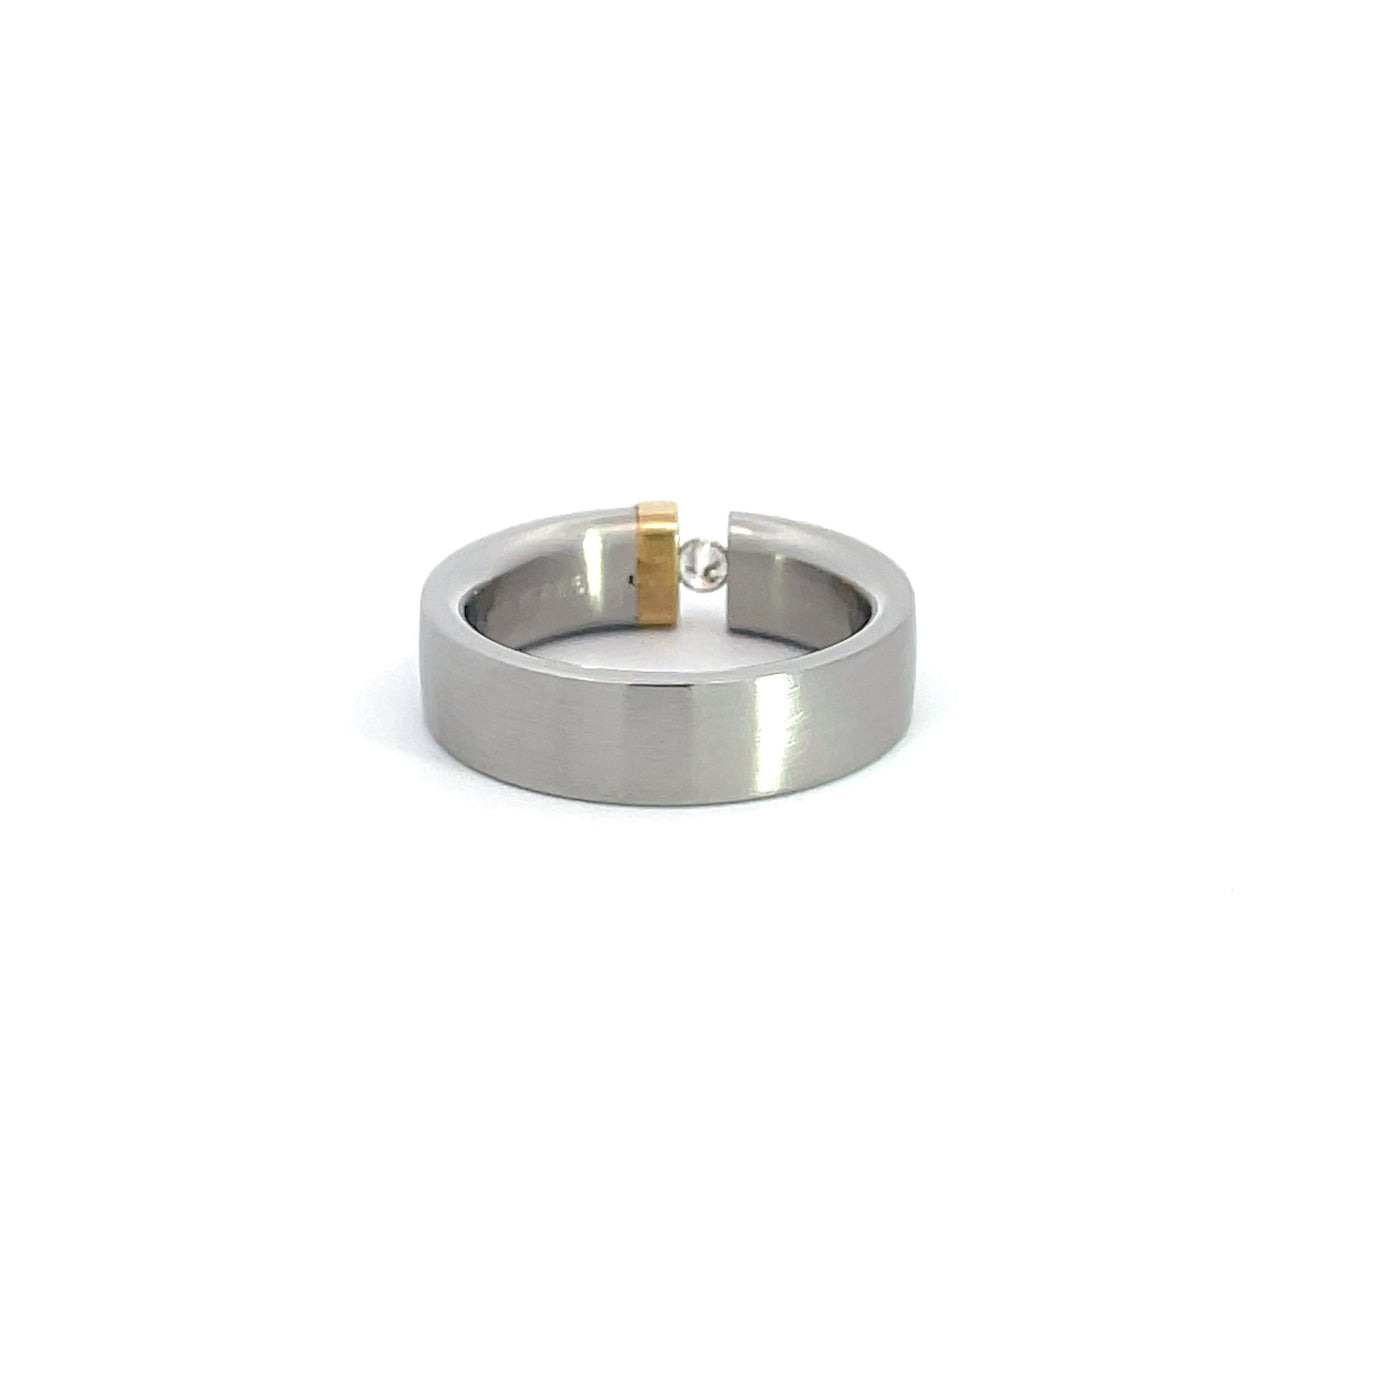 6mm Stainless Steel Tension Set Diamond Ring Size N 1/2